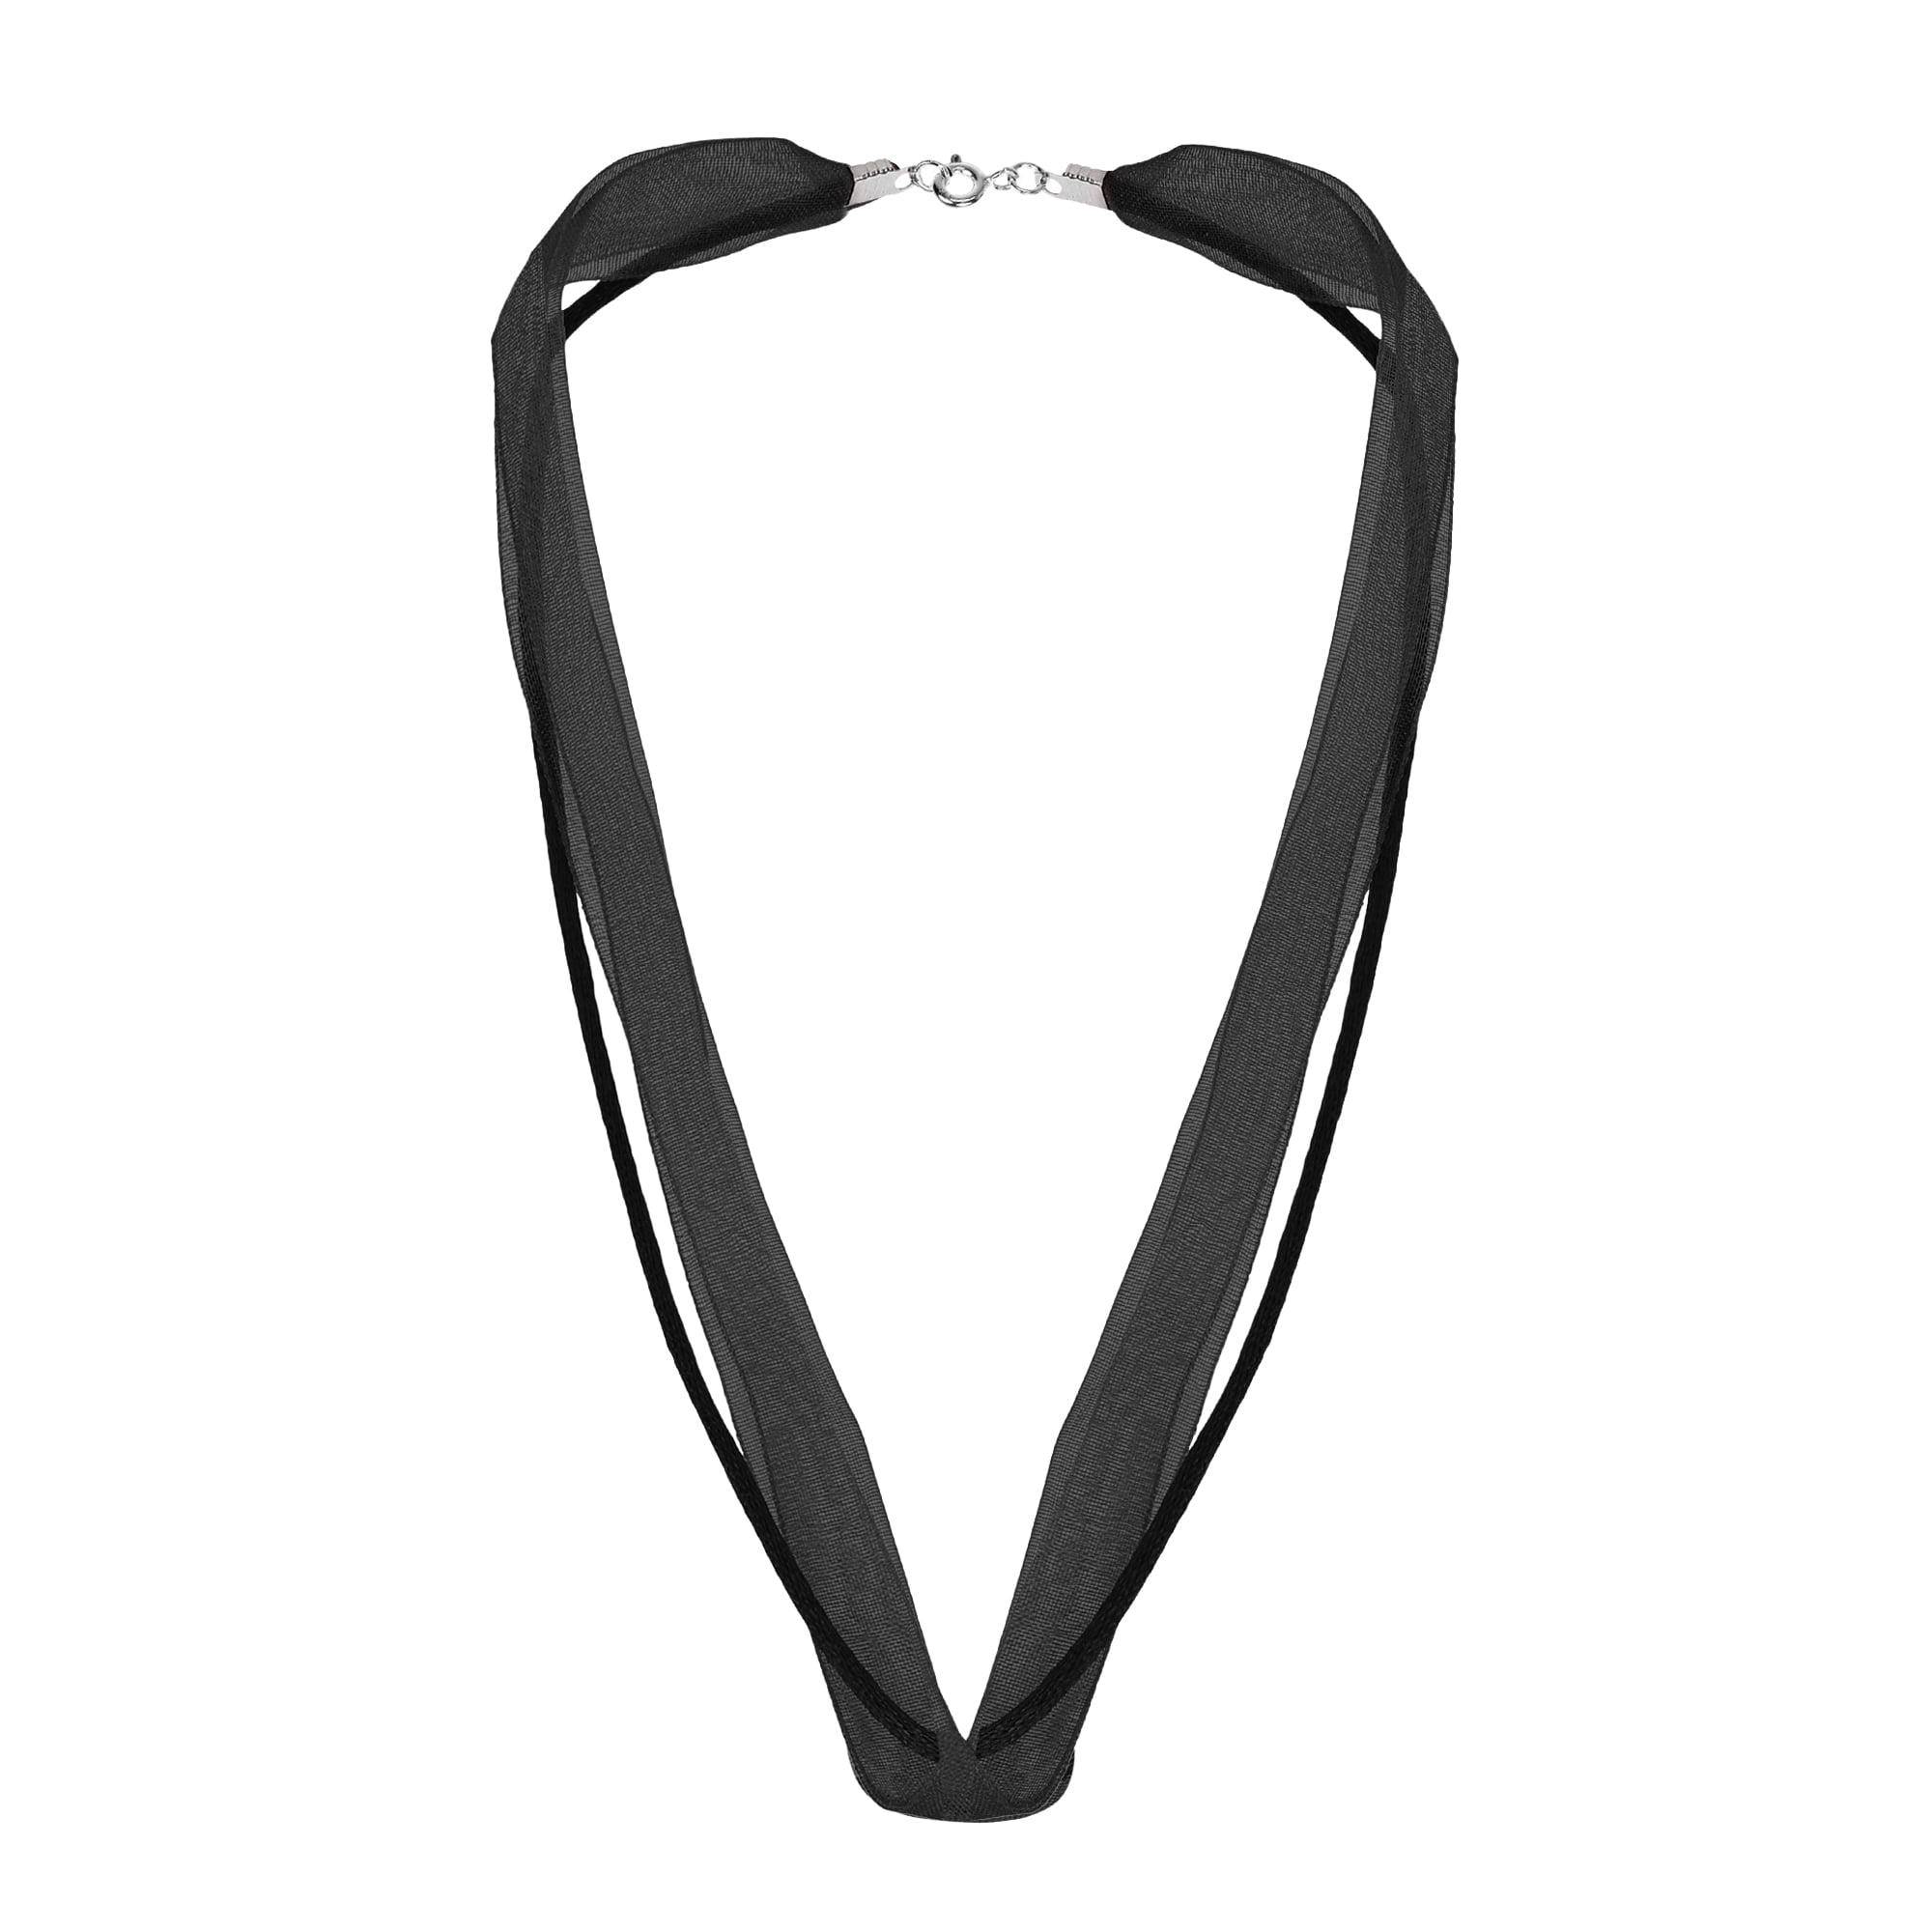 Chic Double Black & Chord Choker Necklace with Sterling Silver Clasp - Walmart.com